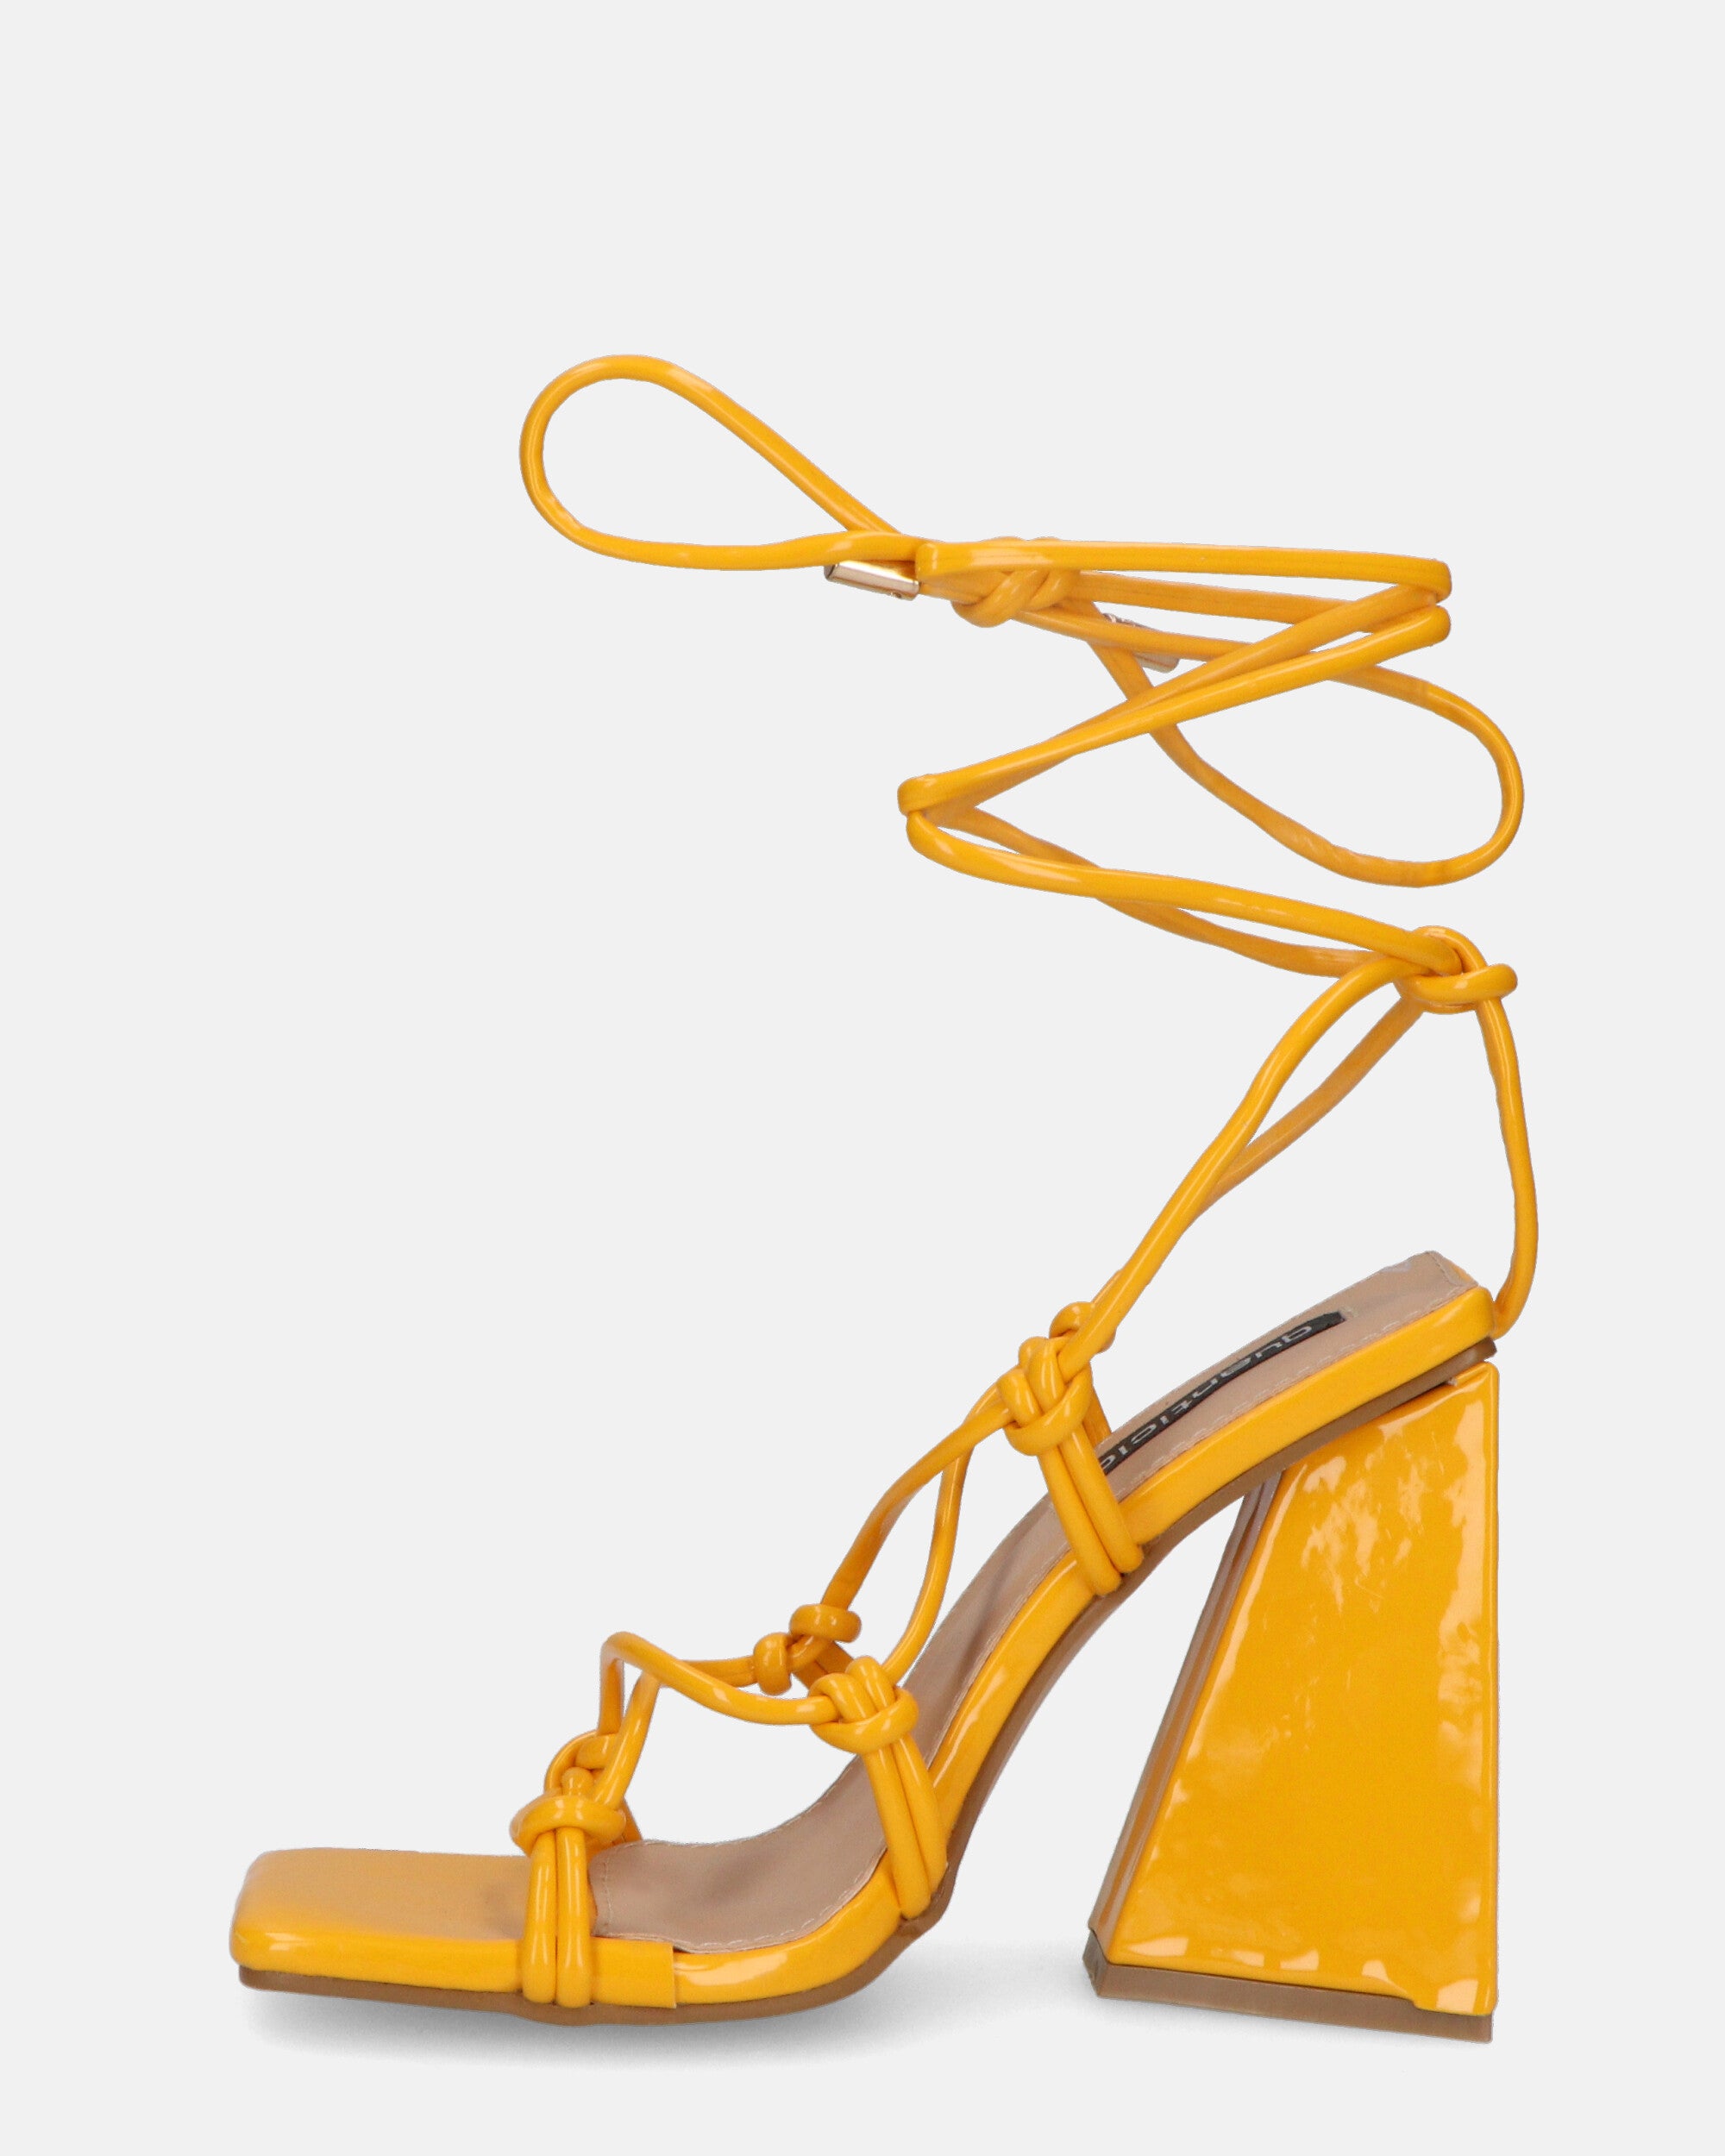 NURAY - high-heeled sandals in glassy orange with laces